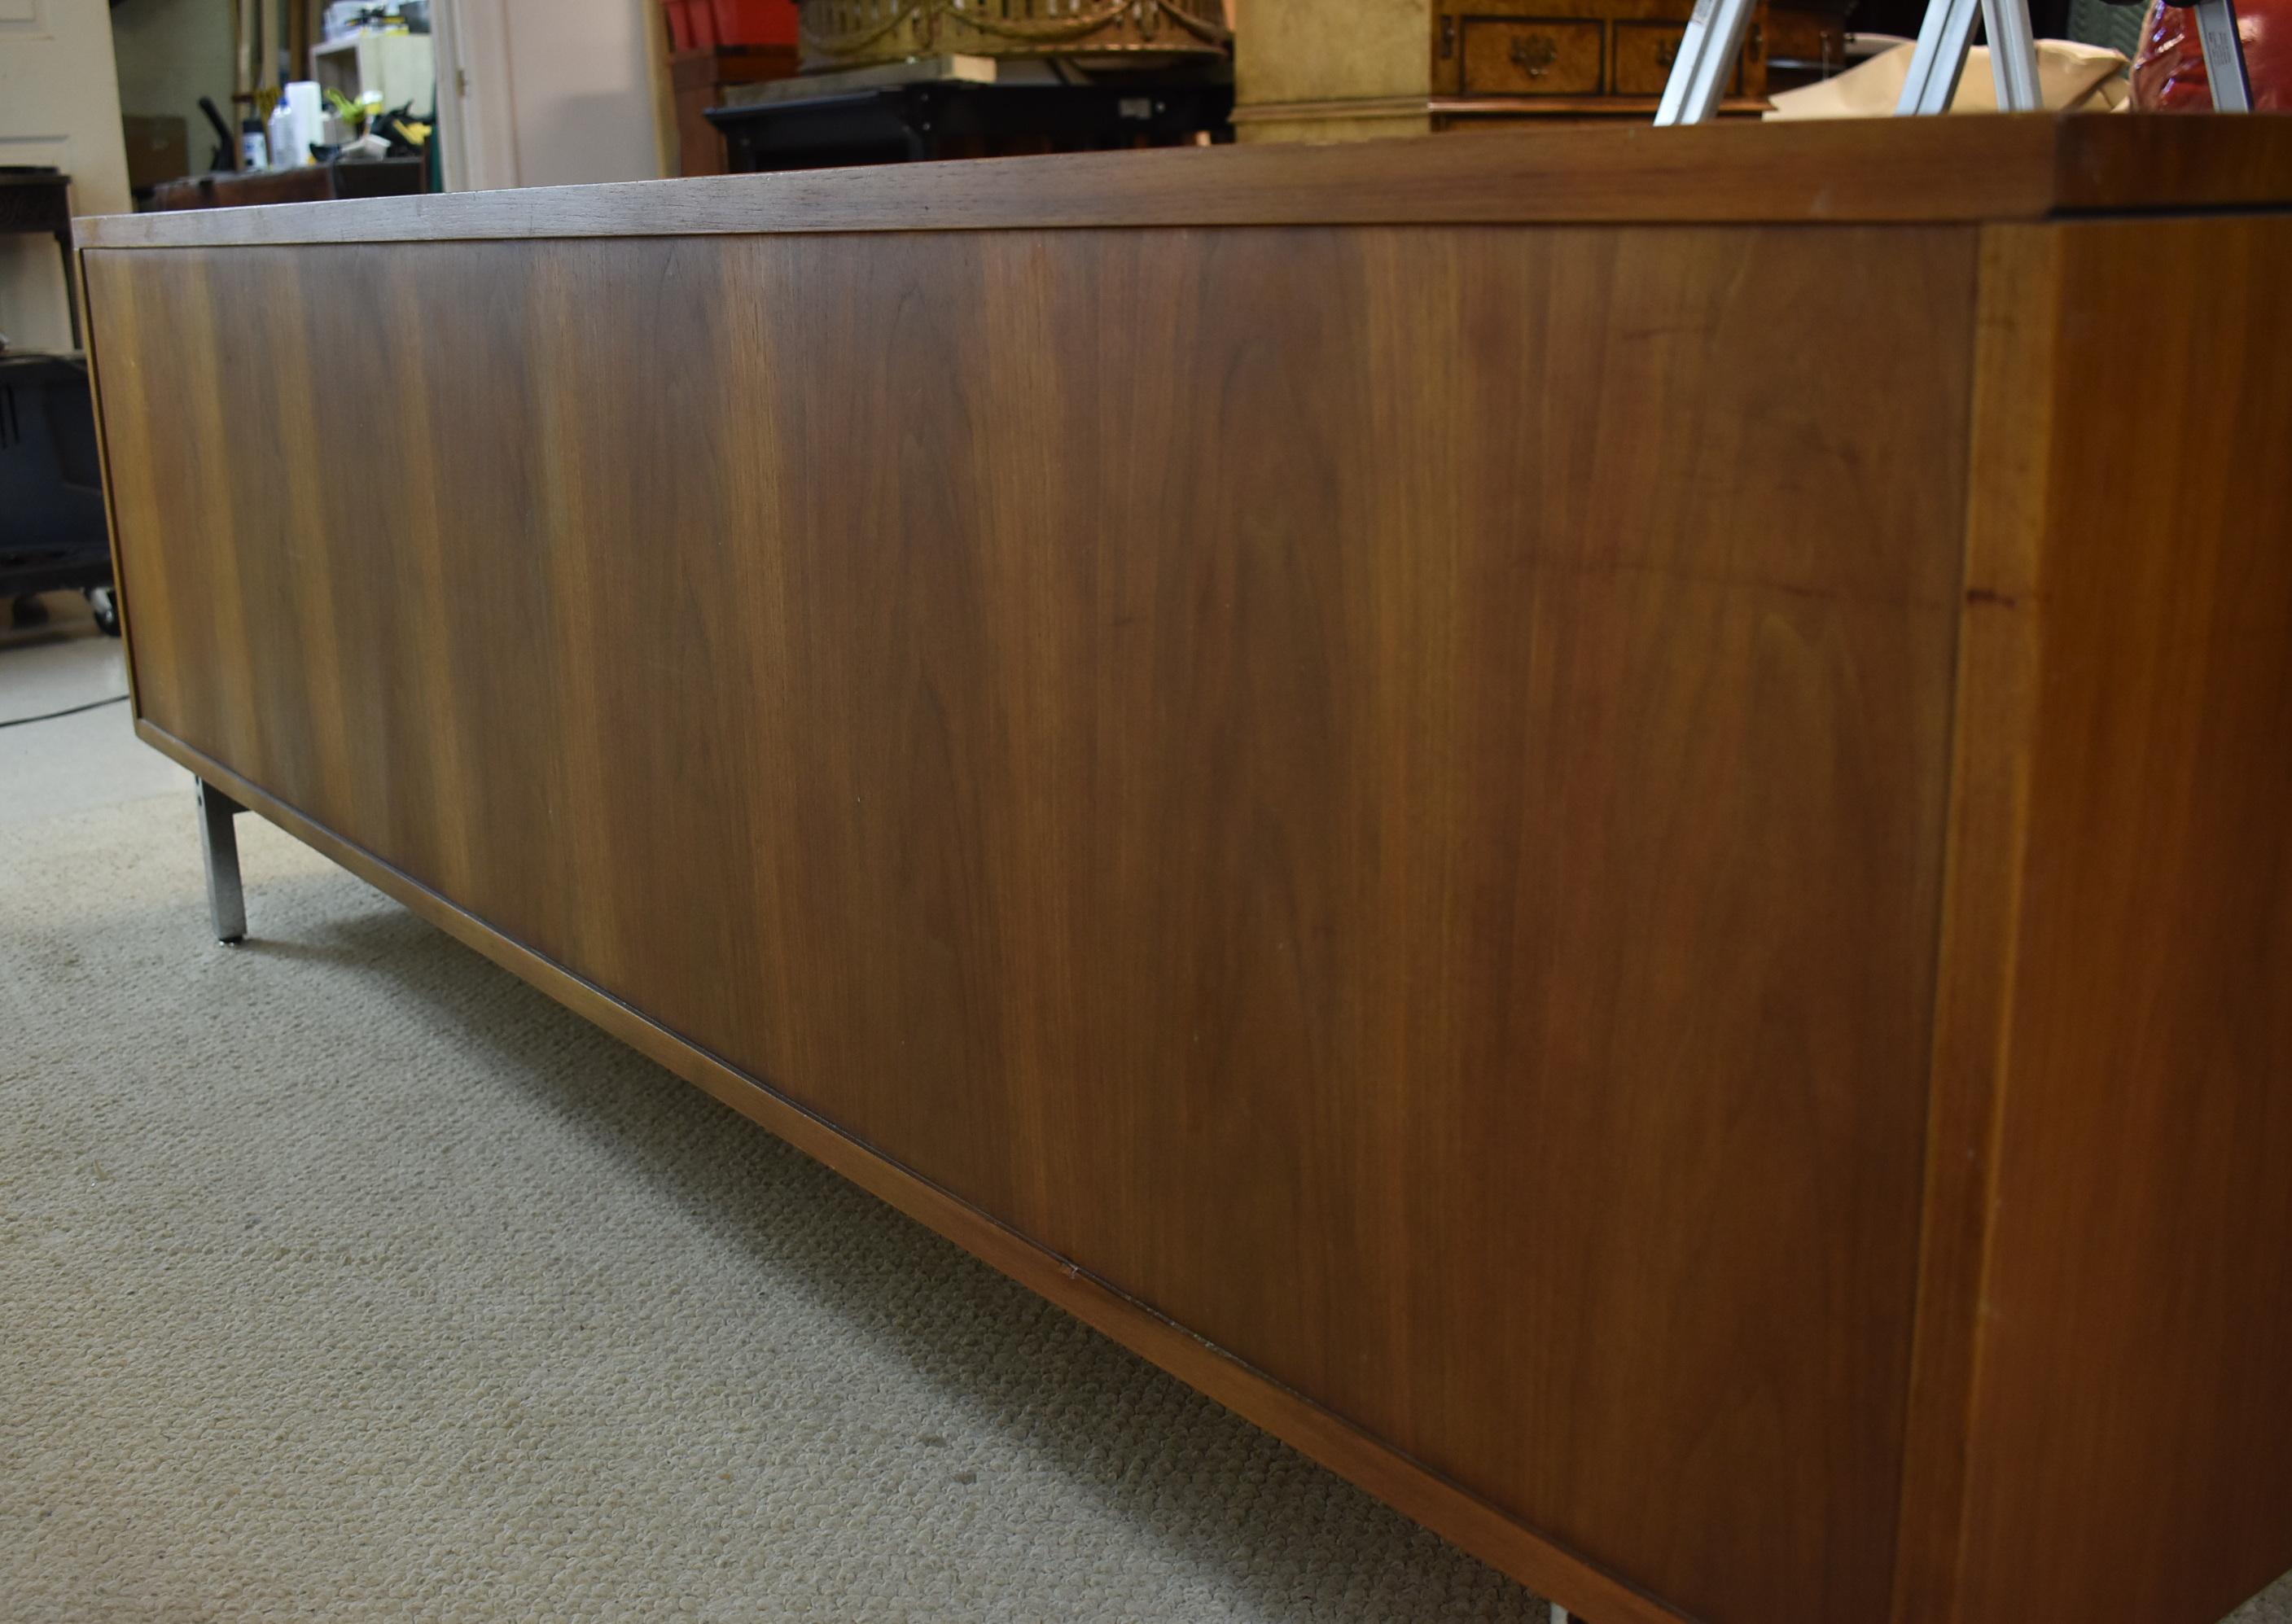 20th Century Mid-Century Modern Charles Eames for Herman Miller Walnut & Chrome Credenza